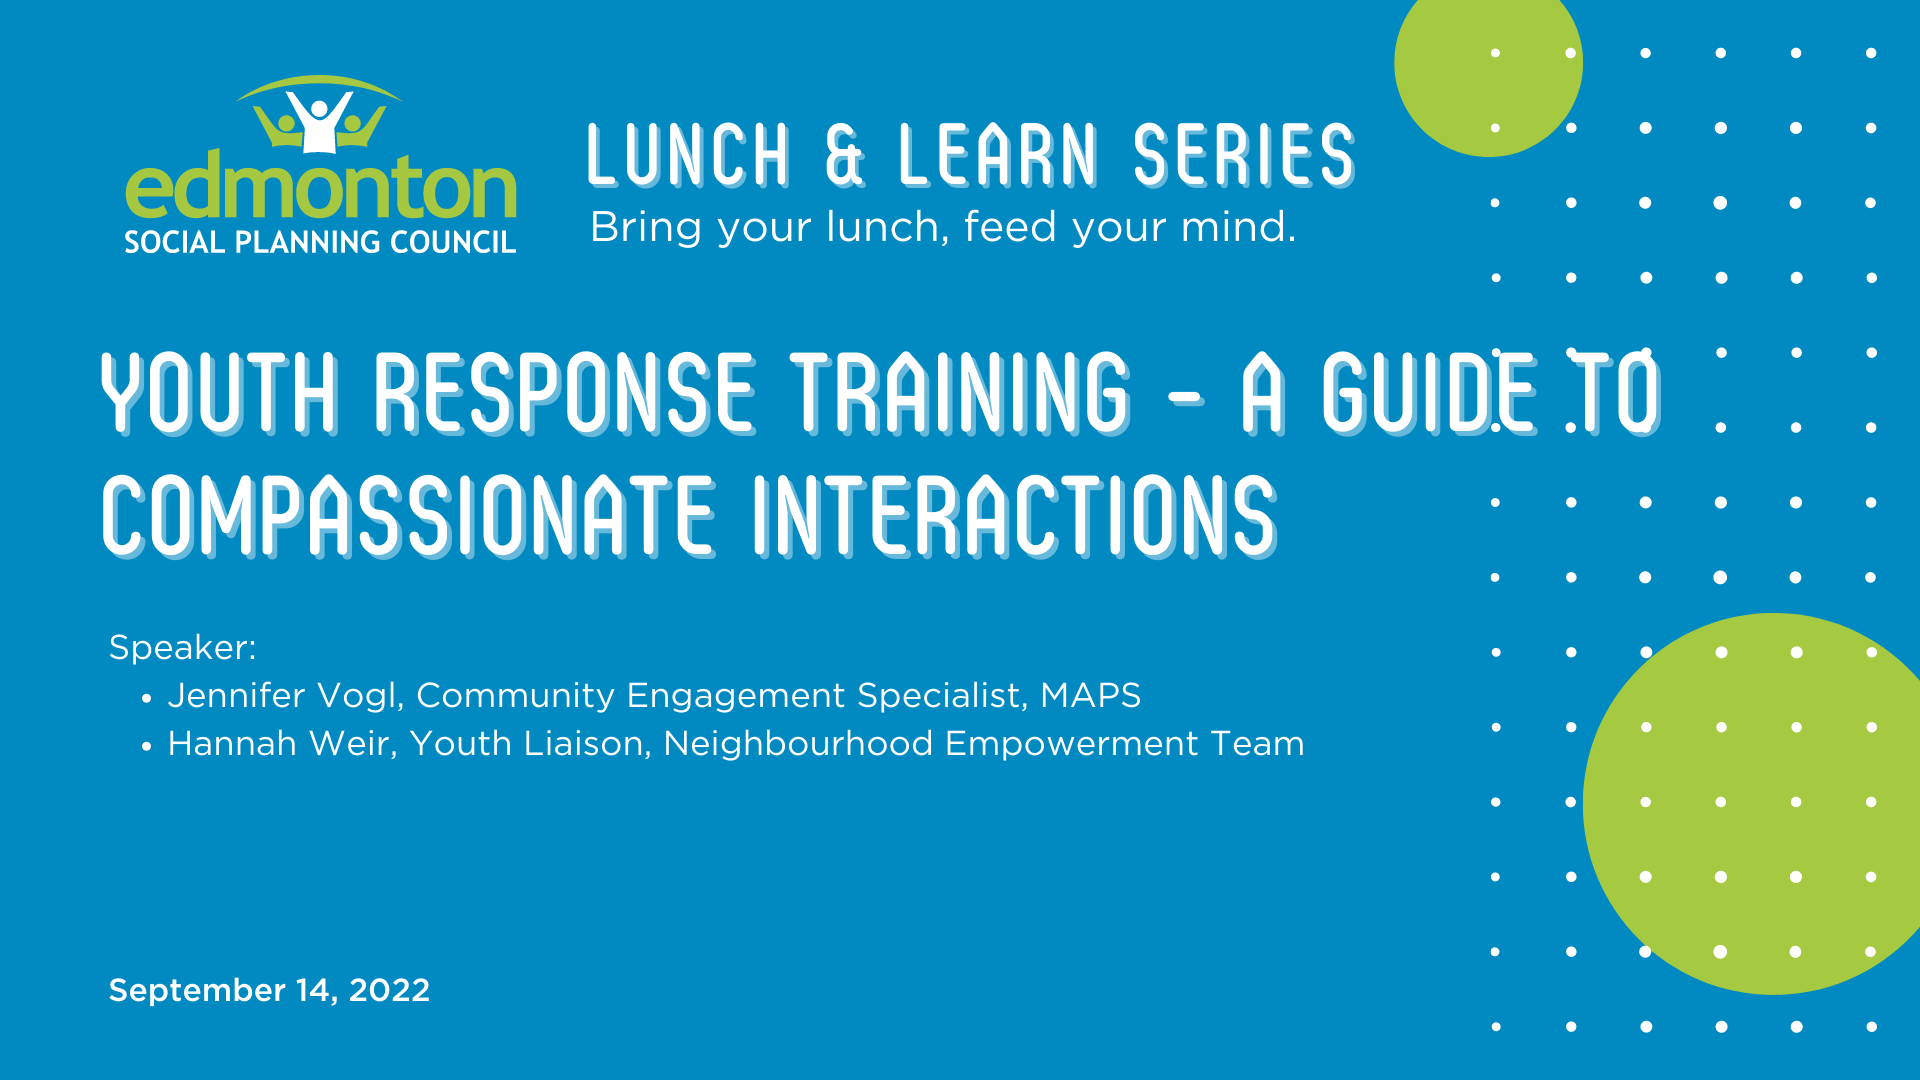 Youth Response Training - A Guide to Compassionate Interactions